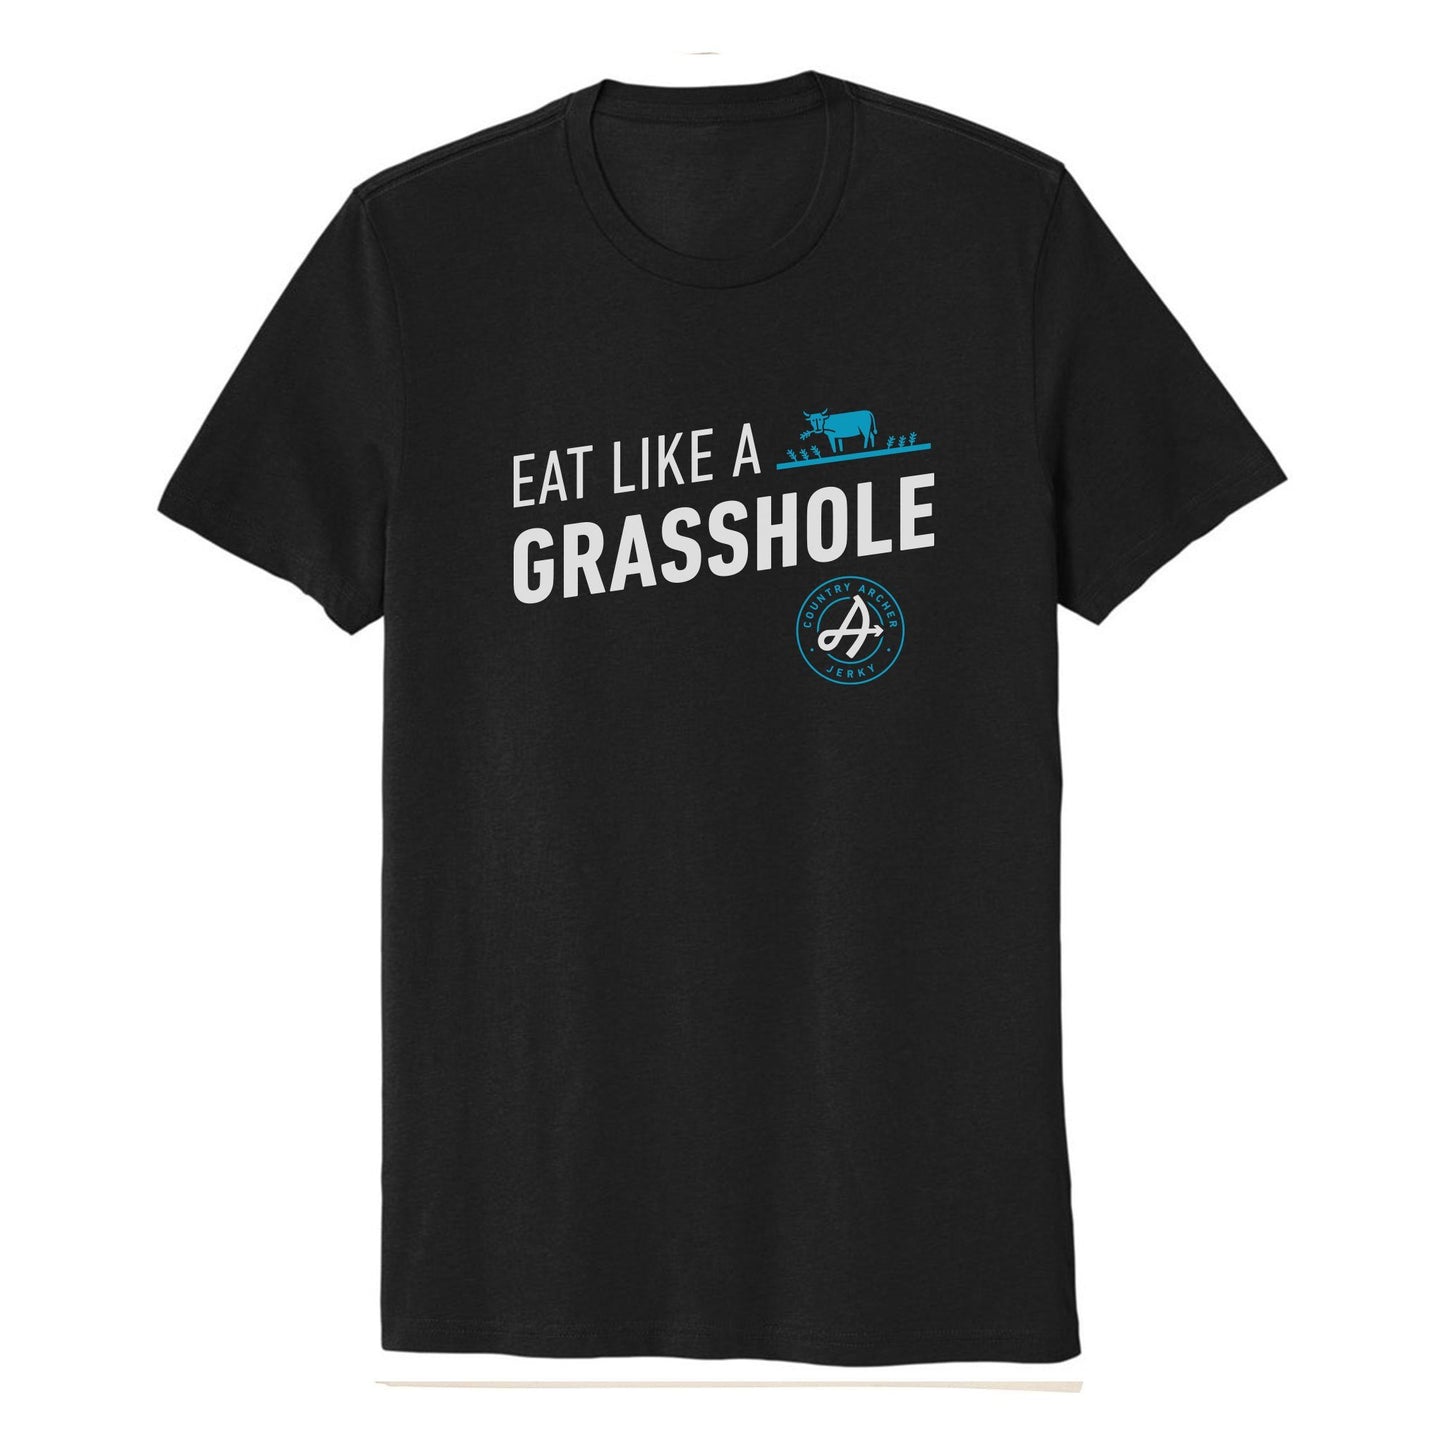  Eat Like A Grasshole T-Shirt by Country Archer, Eat Like A Grasshole T-Shirt, gifts - Grasshole - va, eat-like-a-grasshole-t-shirt, , Small Unisex T-Shirt